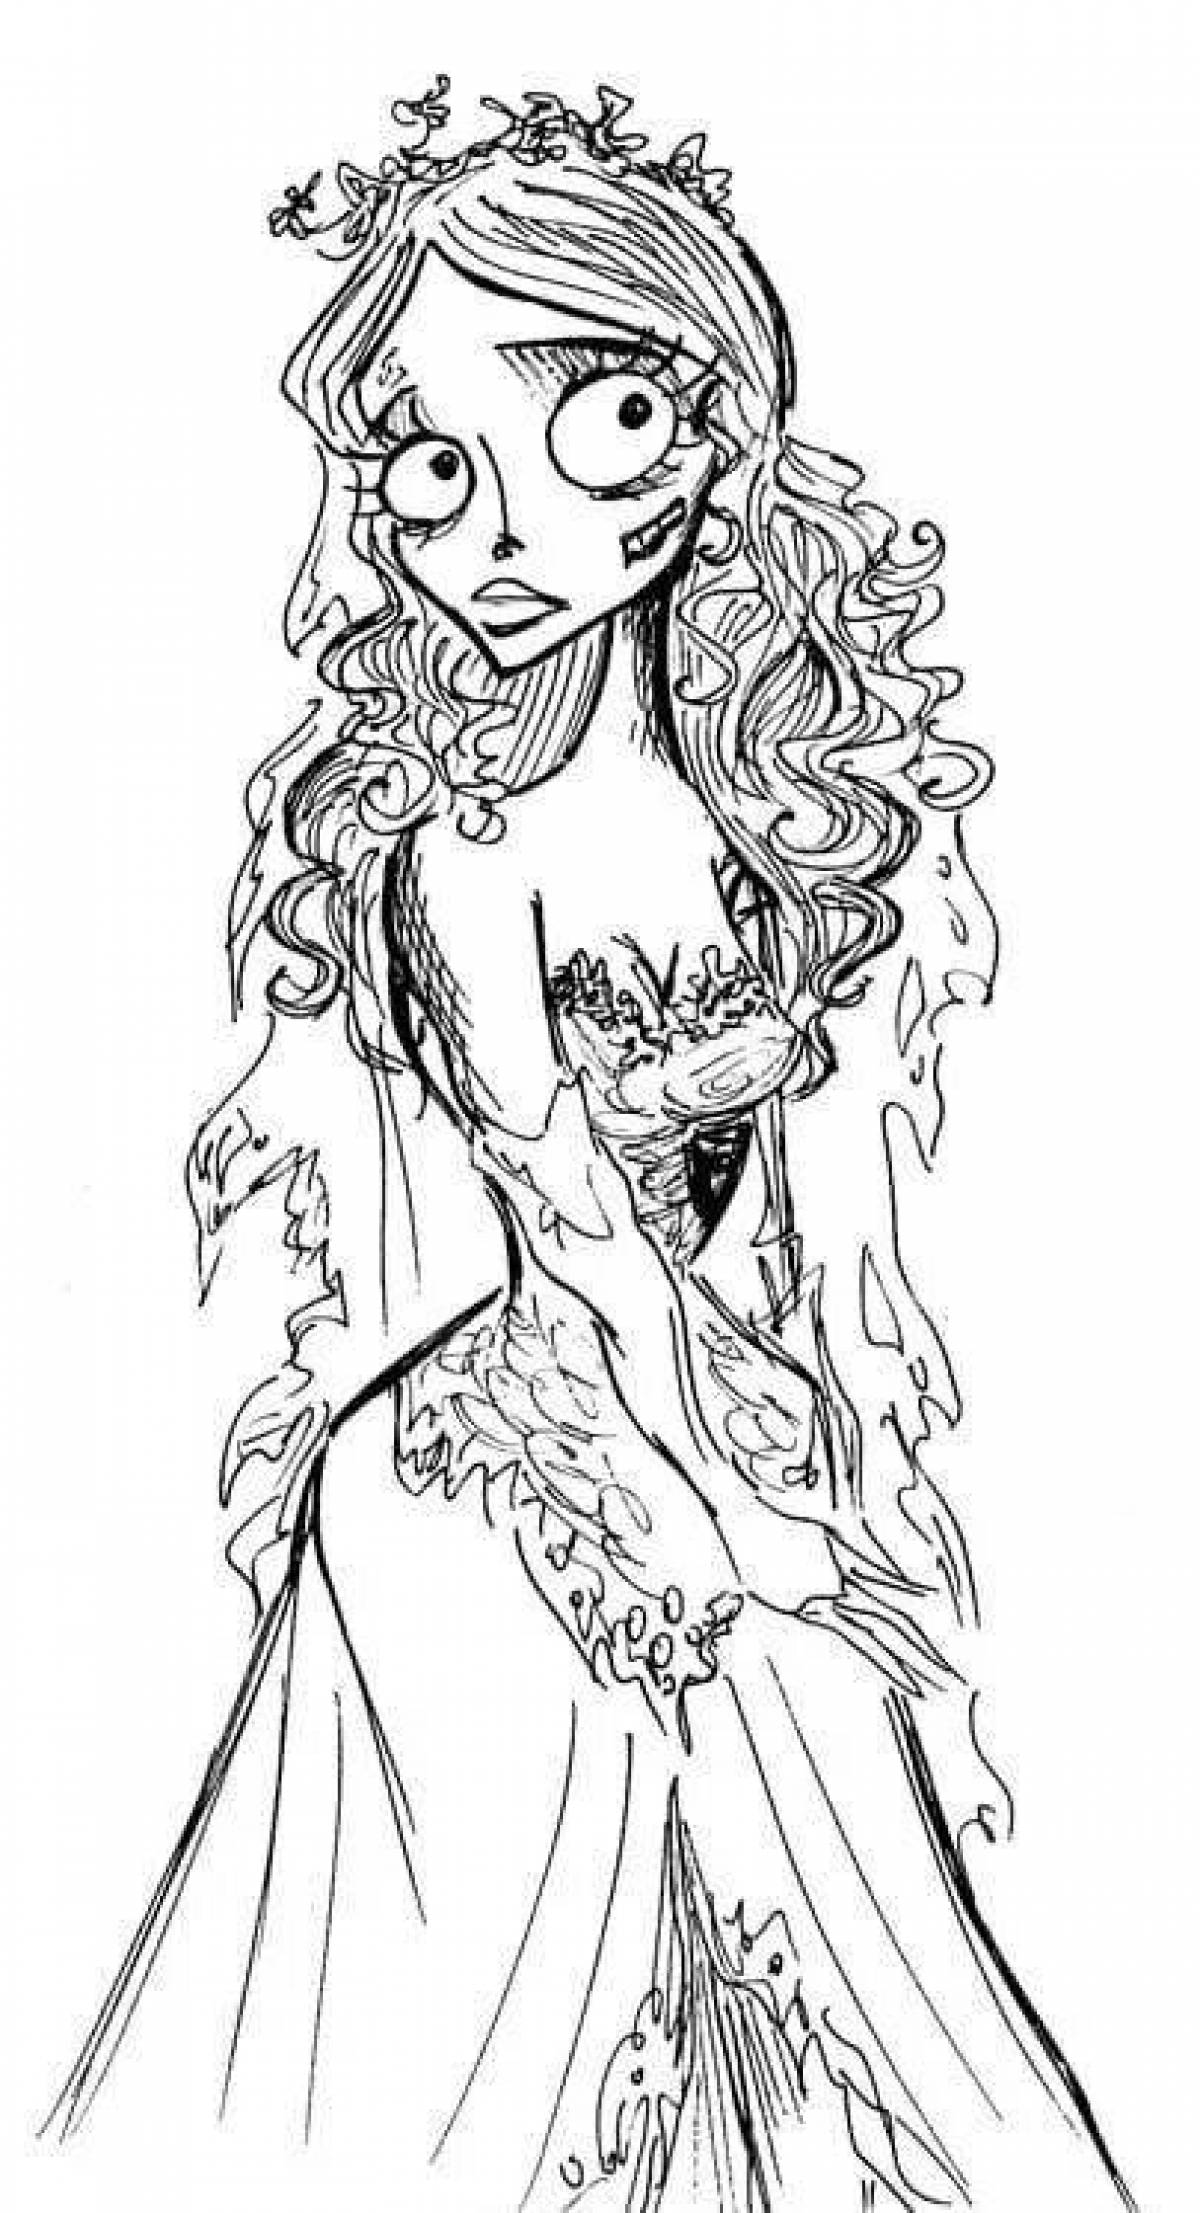 Disgusting corpse bride coloring book